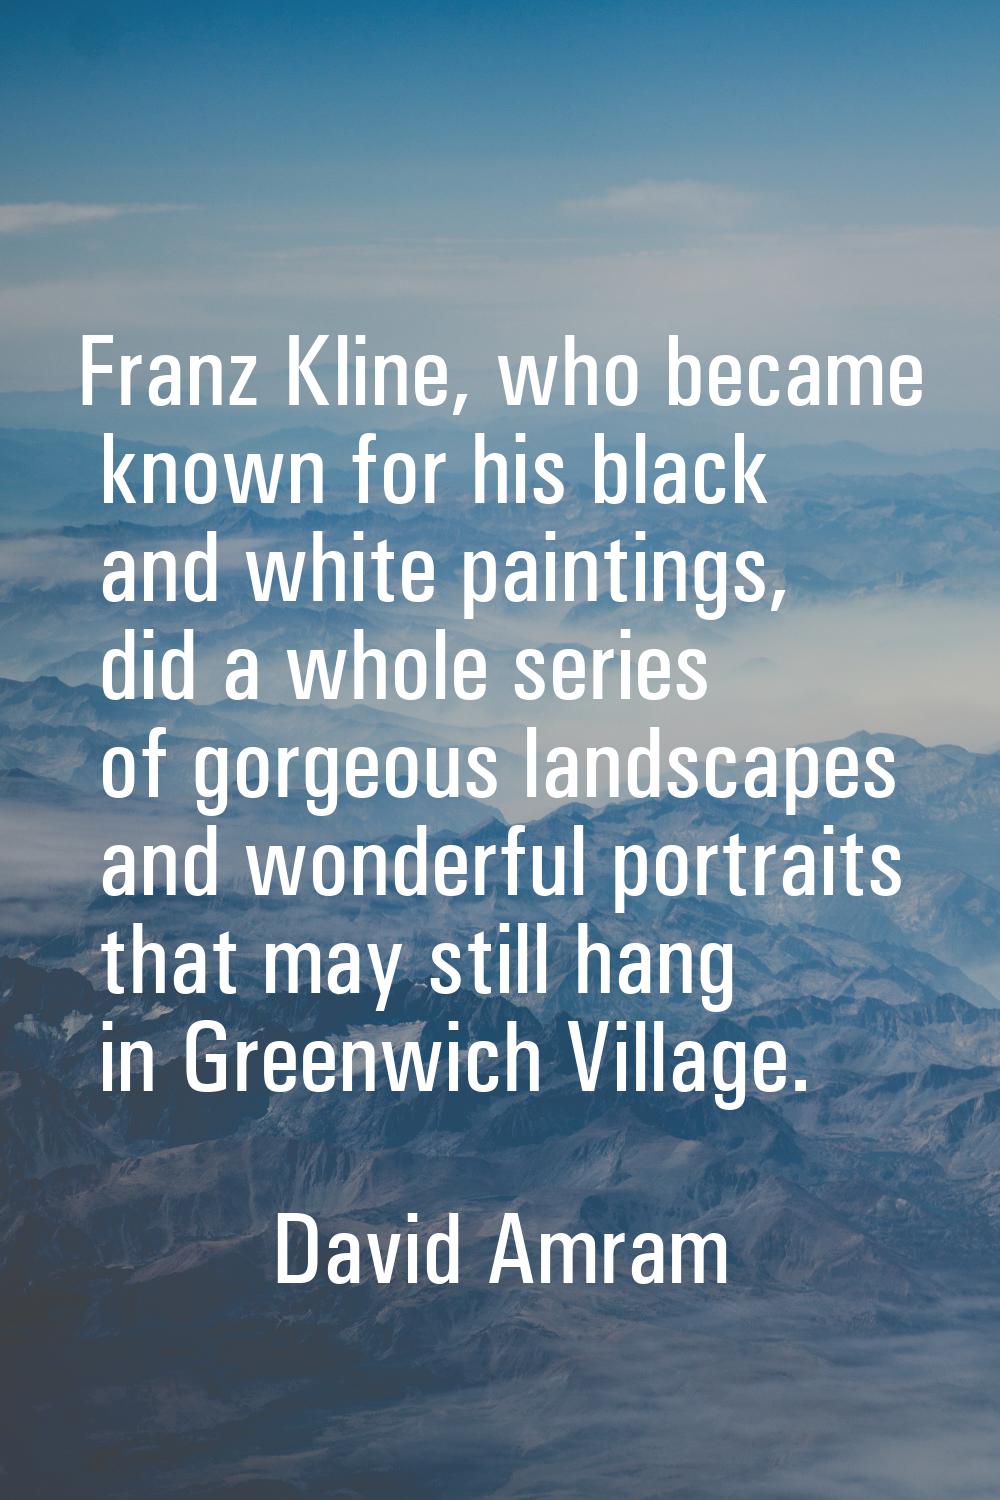 Franz Kline, who became known for his black and white paintings, did a whole series of gorgeous lan